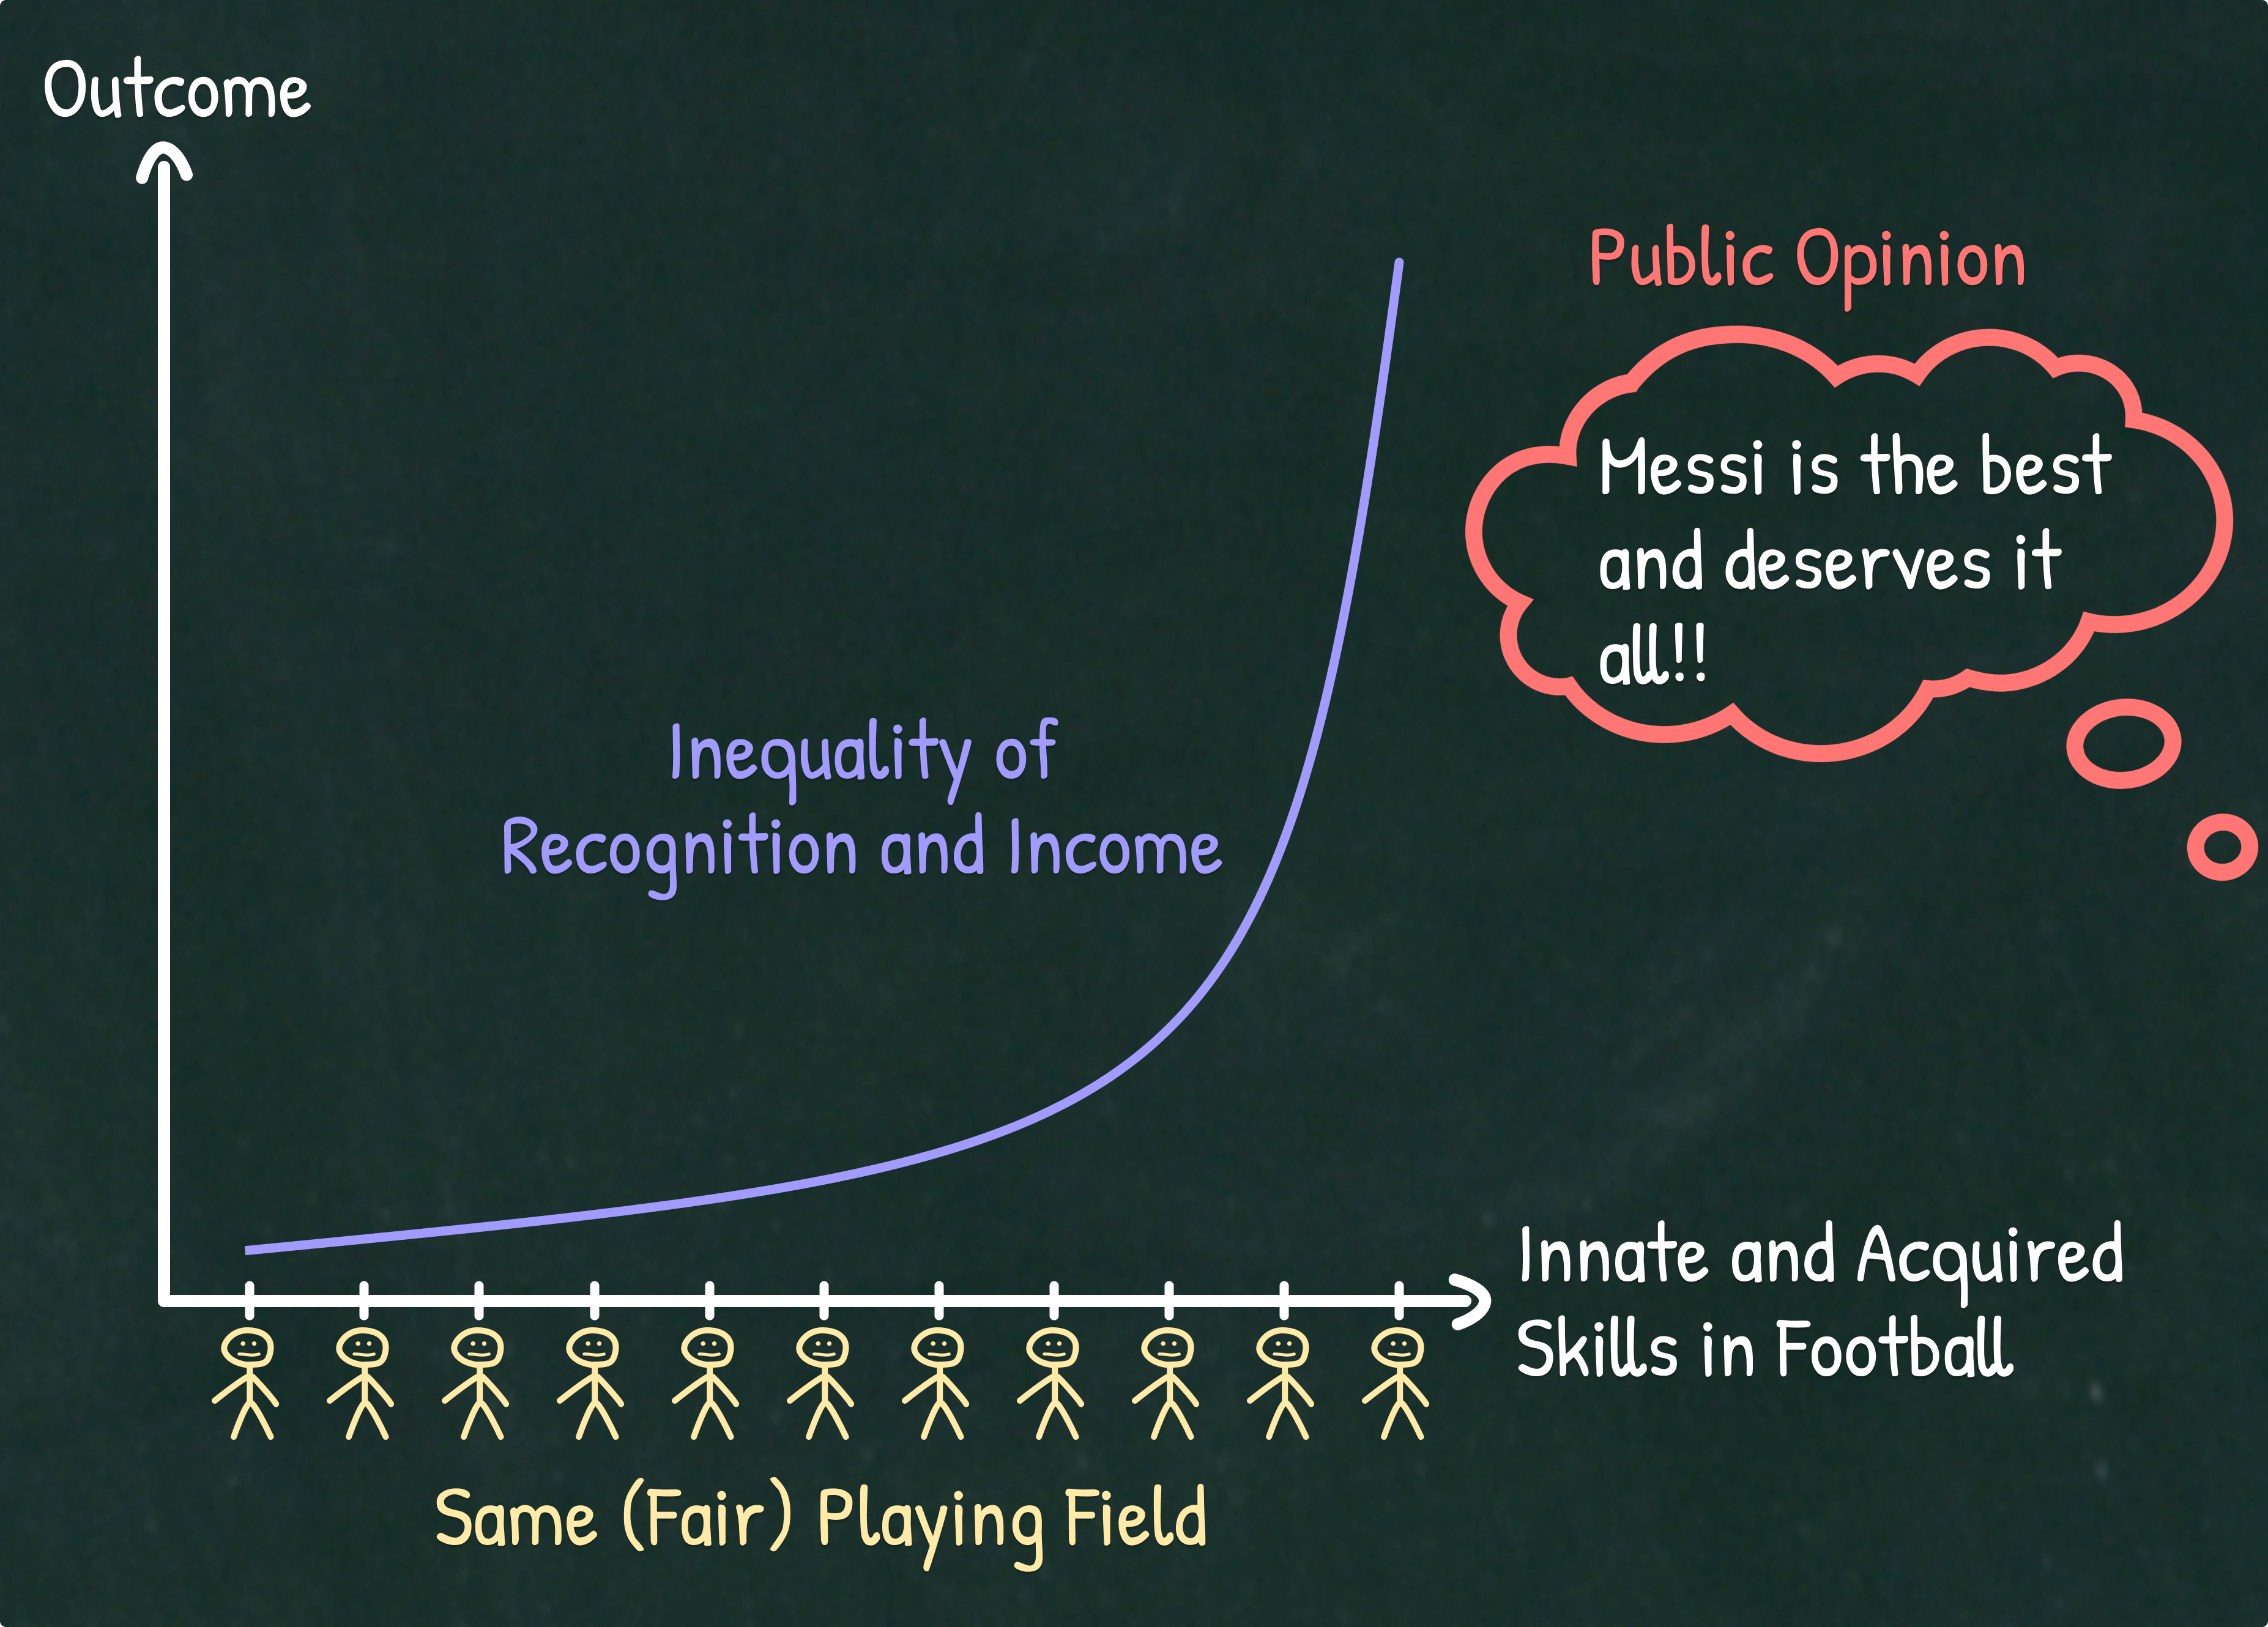 Illustration shows how people are OK with inequality of outcomes in Football, as long as the playing field is fair